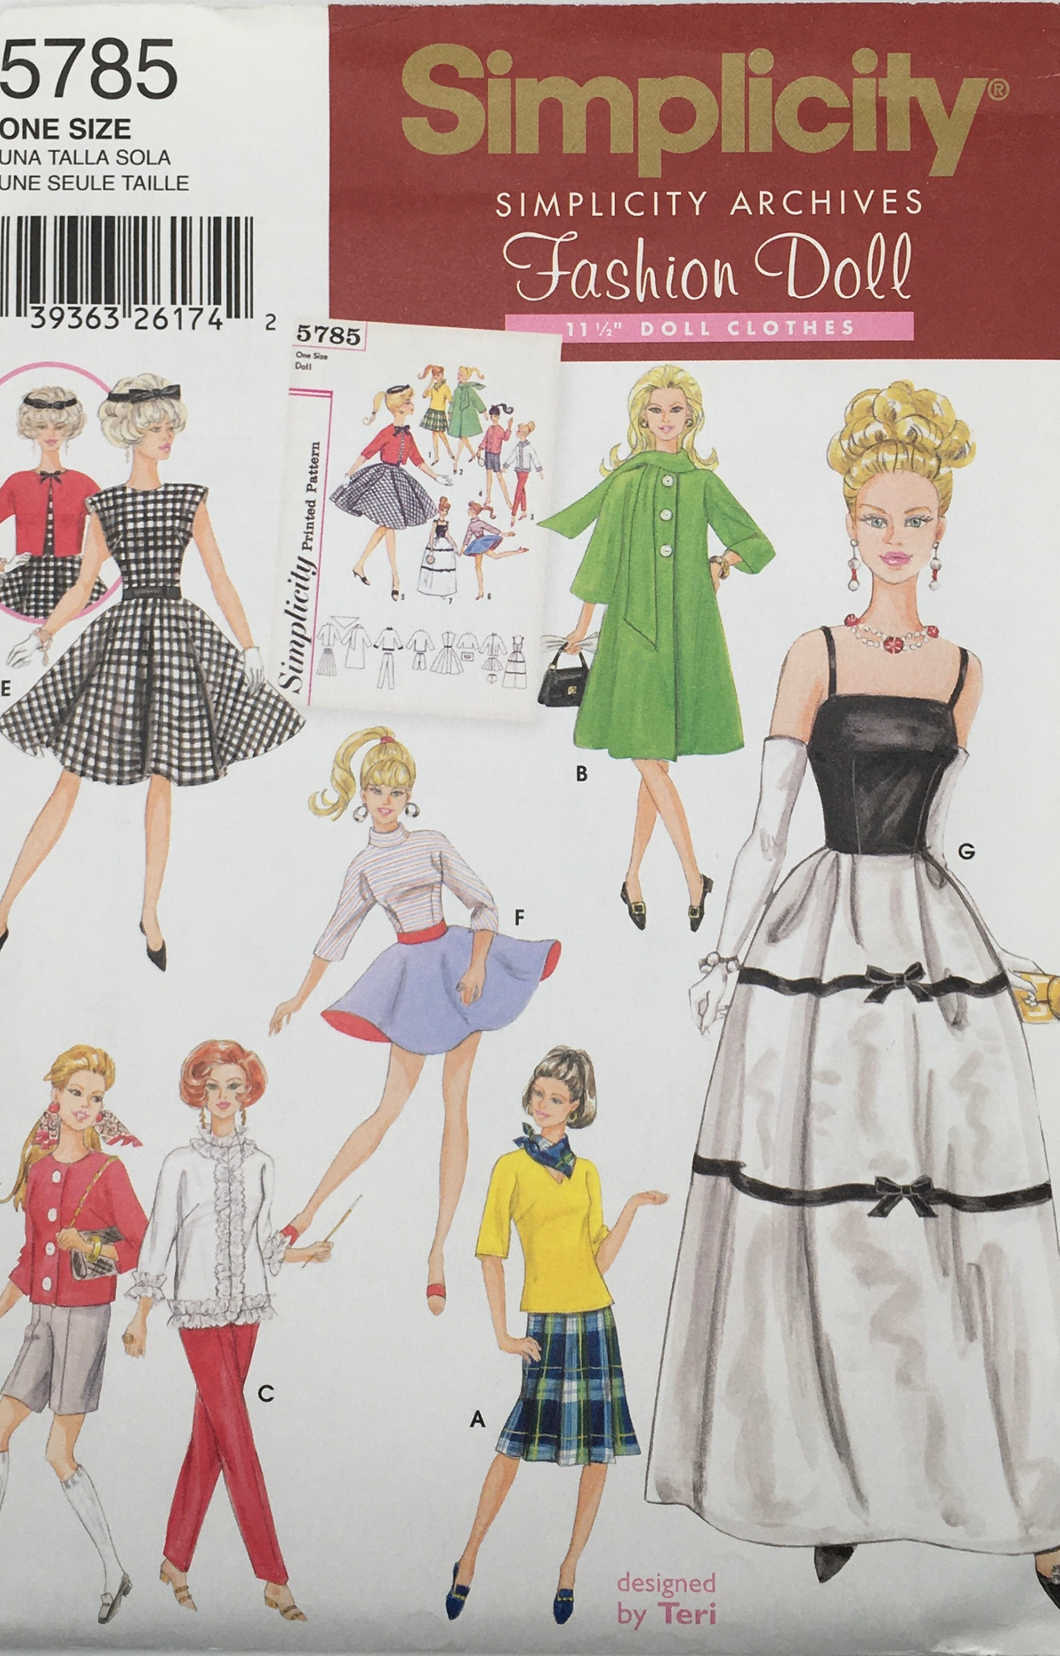 1960's Reproduction Sewing Pattern: Simplicity 5785